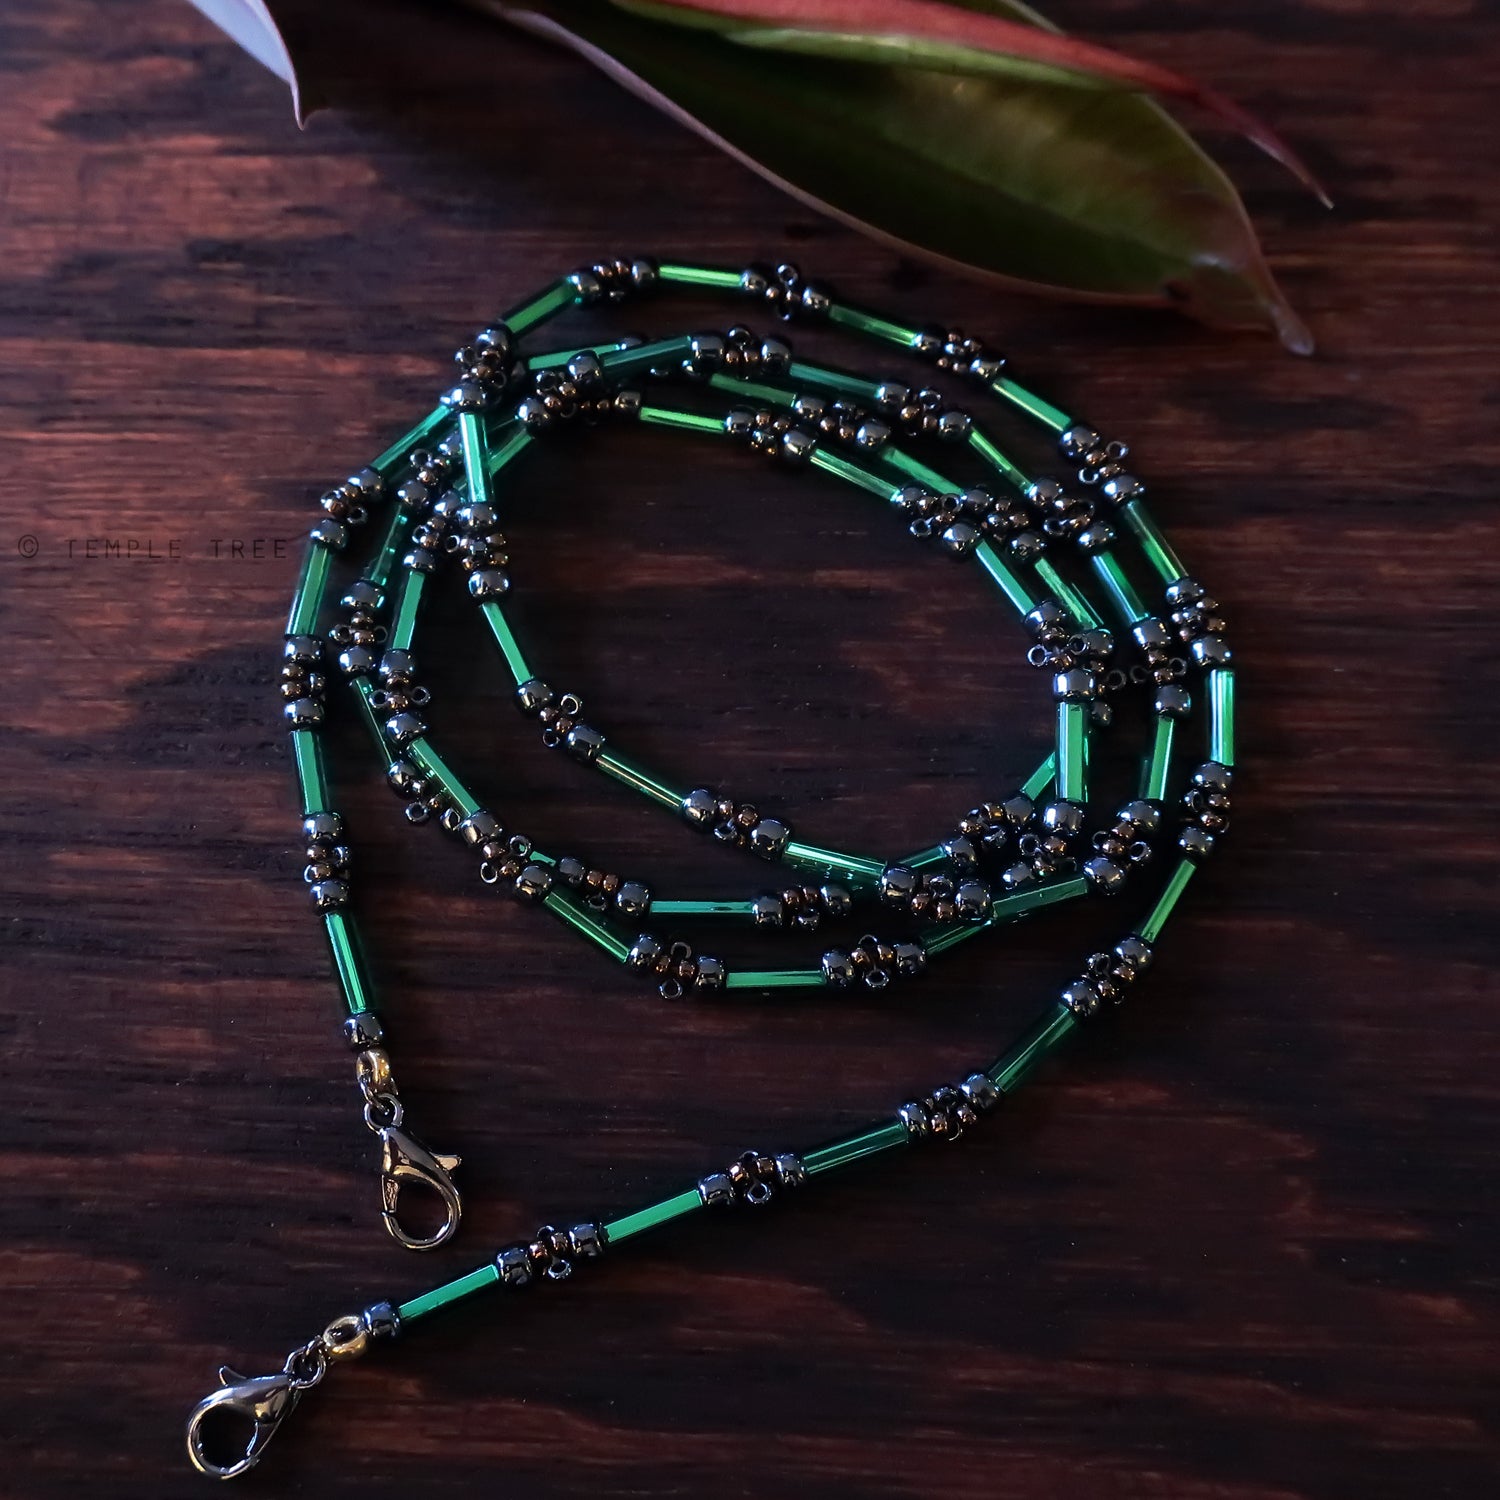 Temple Tree Lost Circuitry Beaded Mask Lanyard - trAnsist0r 46v1